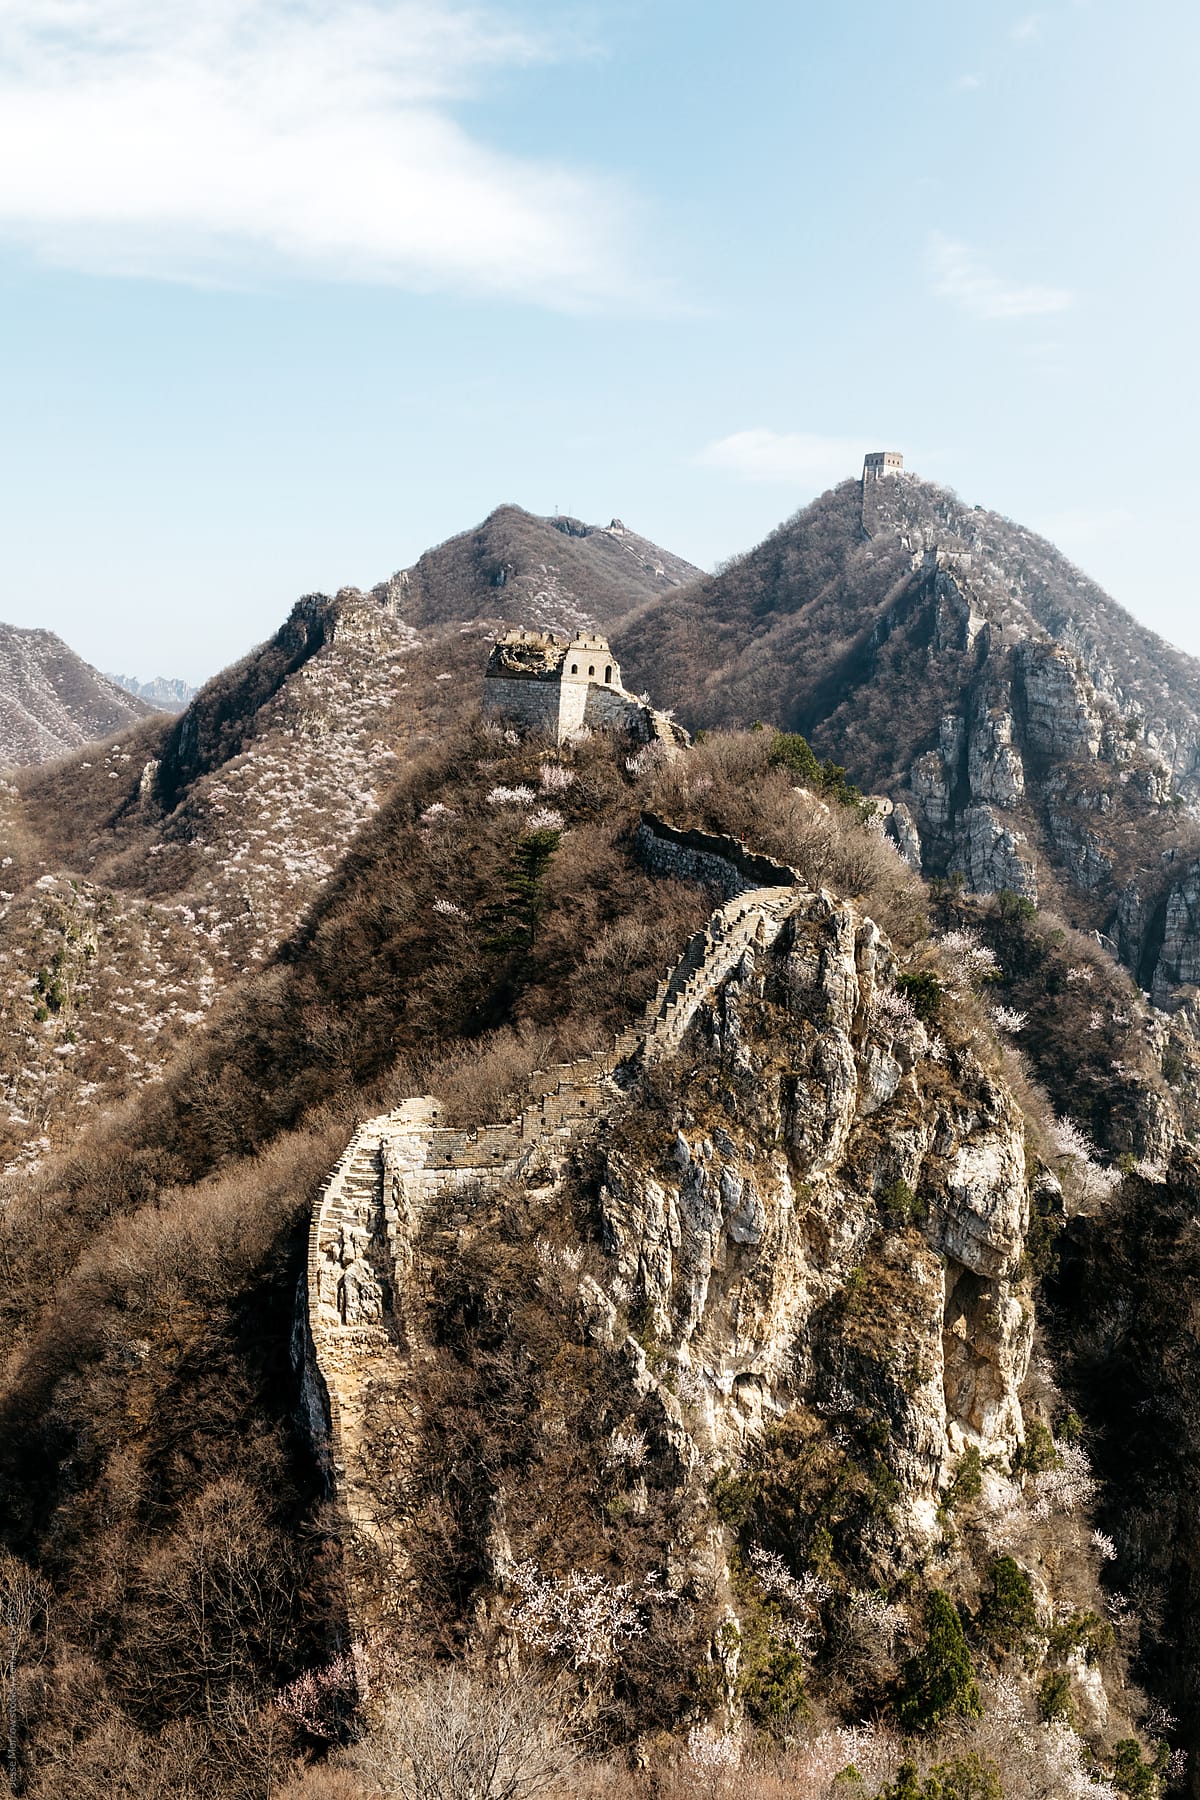 Beautiful landscape scenery while trekking remote areas of The Great Wall of China